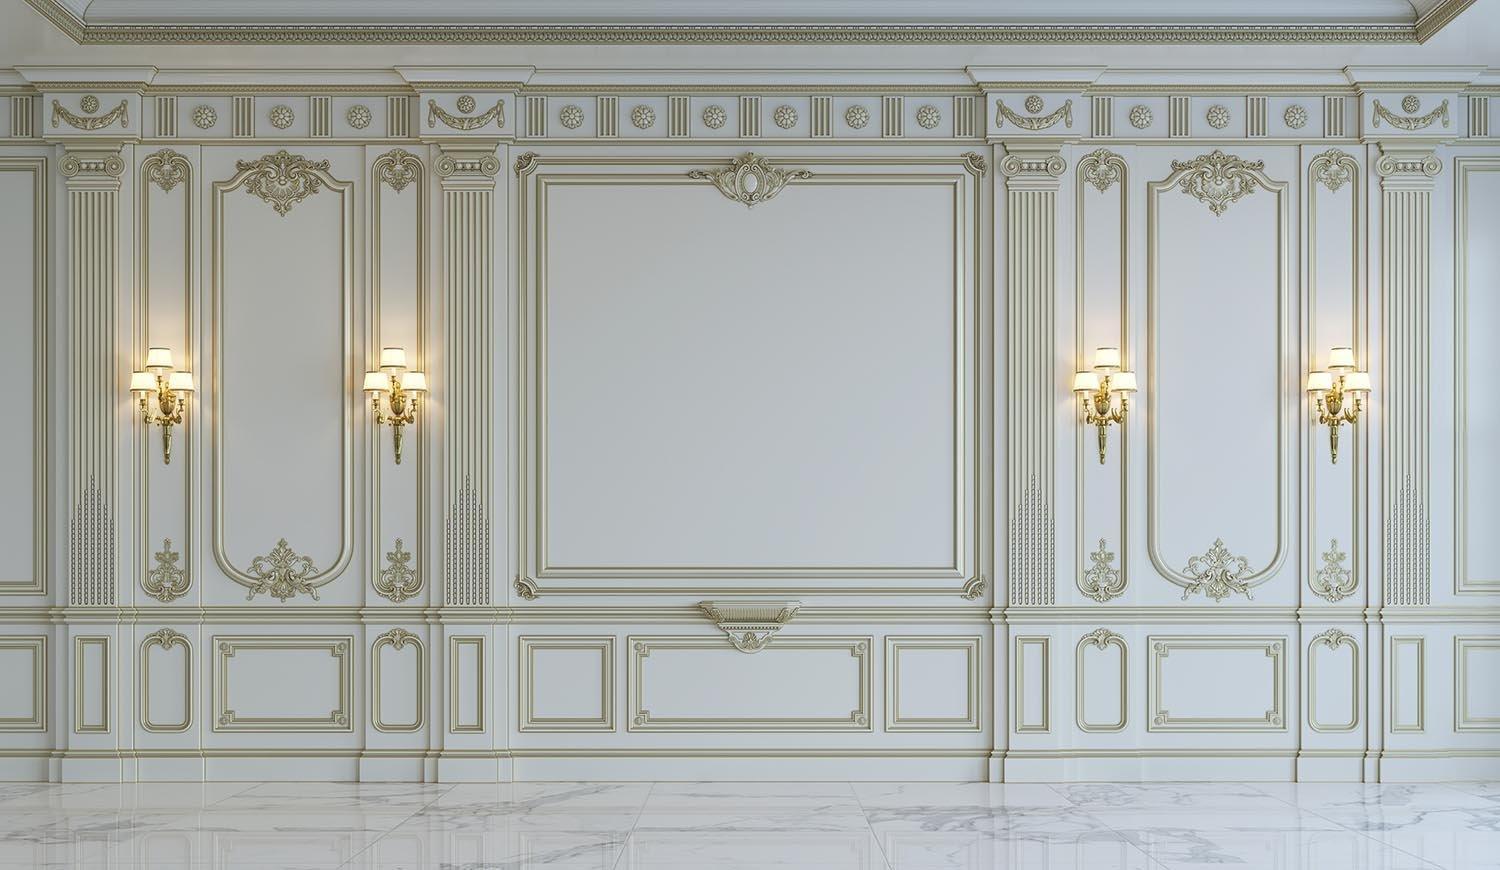 White Wall Panels In Classical Style With Gilding And Sconces Photography Backdrop J-0700 Shopbackdrop